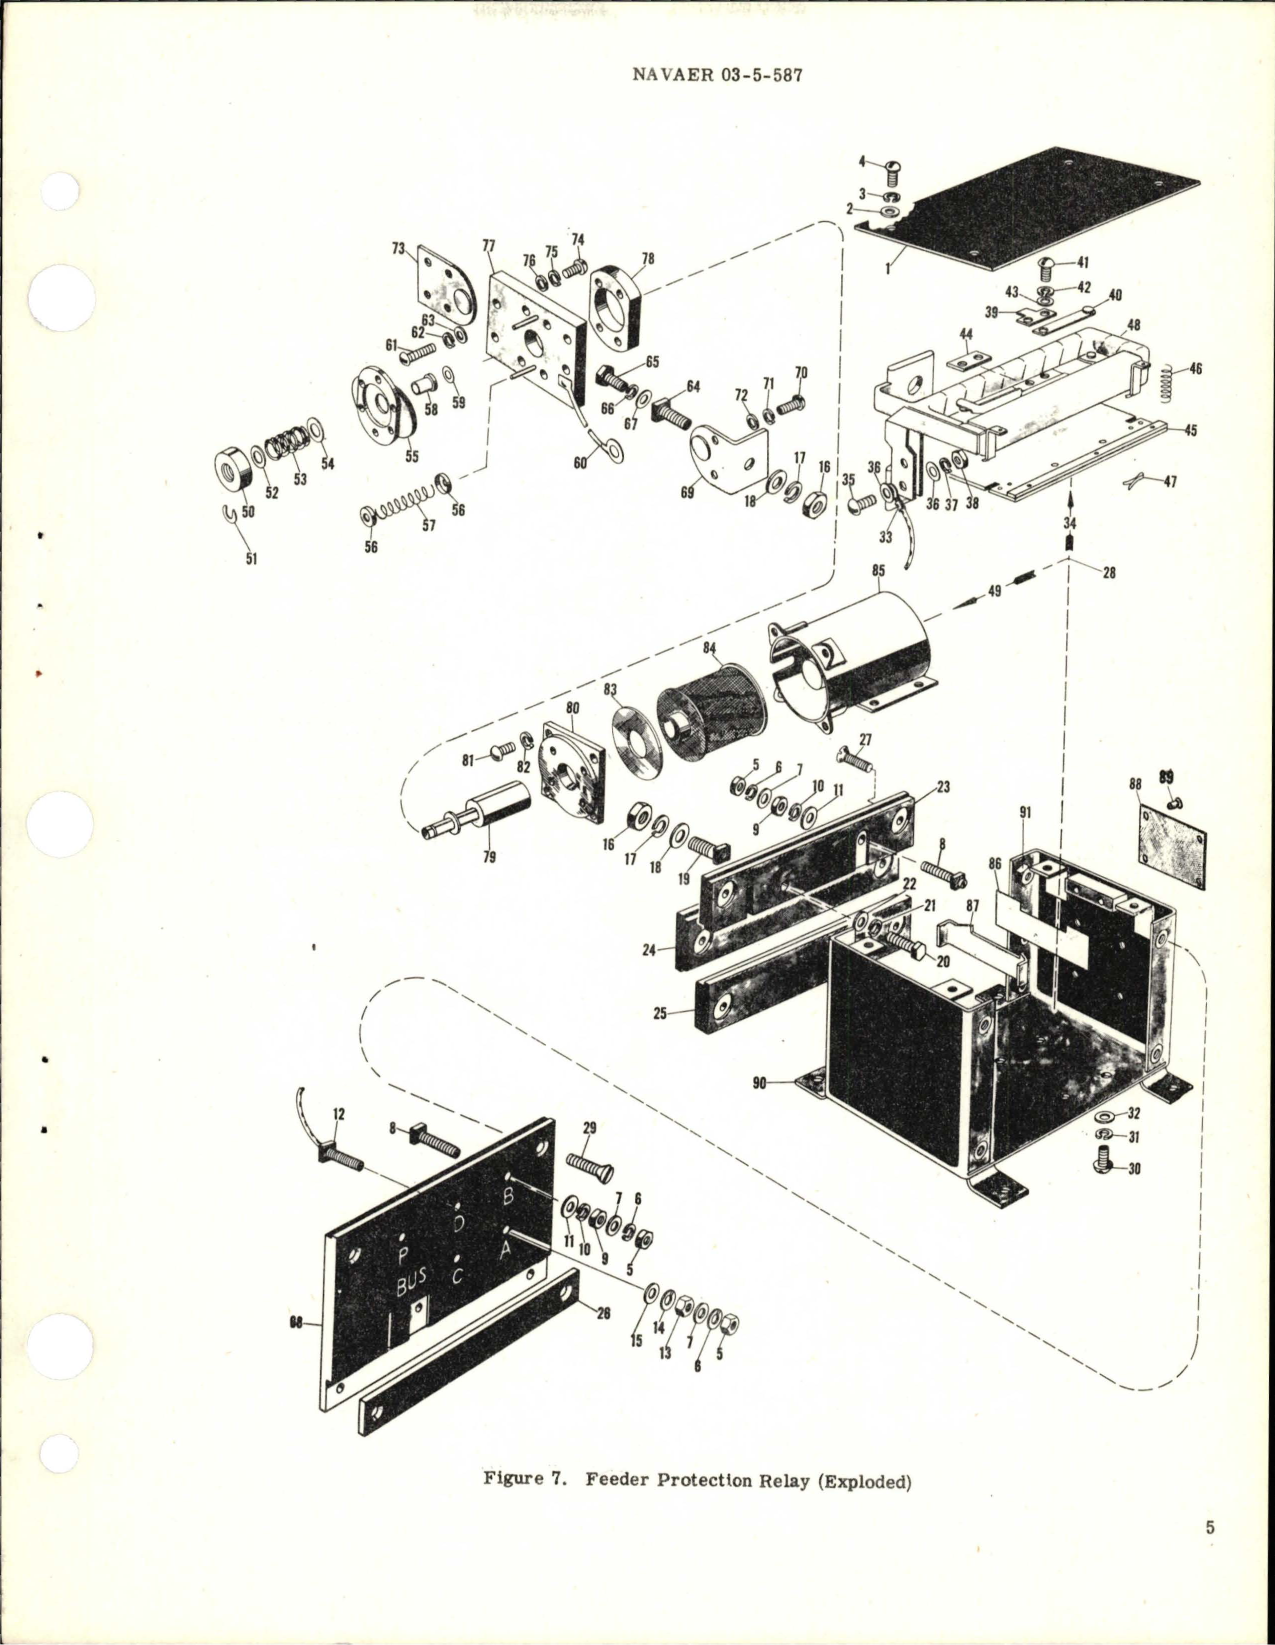 Sample page 5 from AirCorps Library document: Overhaul Instructions with Parts Breakdown for Feeder Protection Relay - Part A14A9755-2 - Type AVR-232